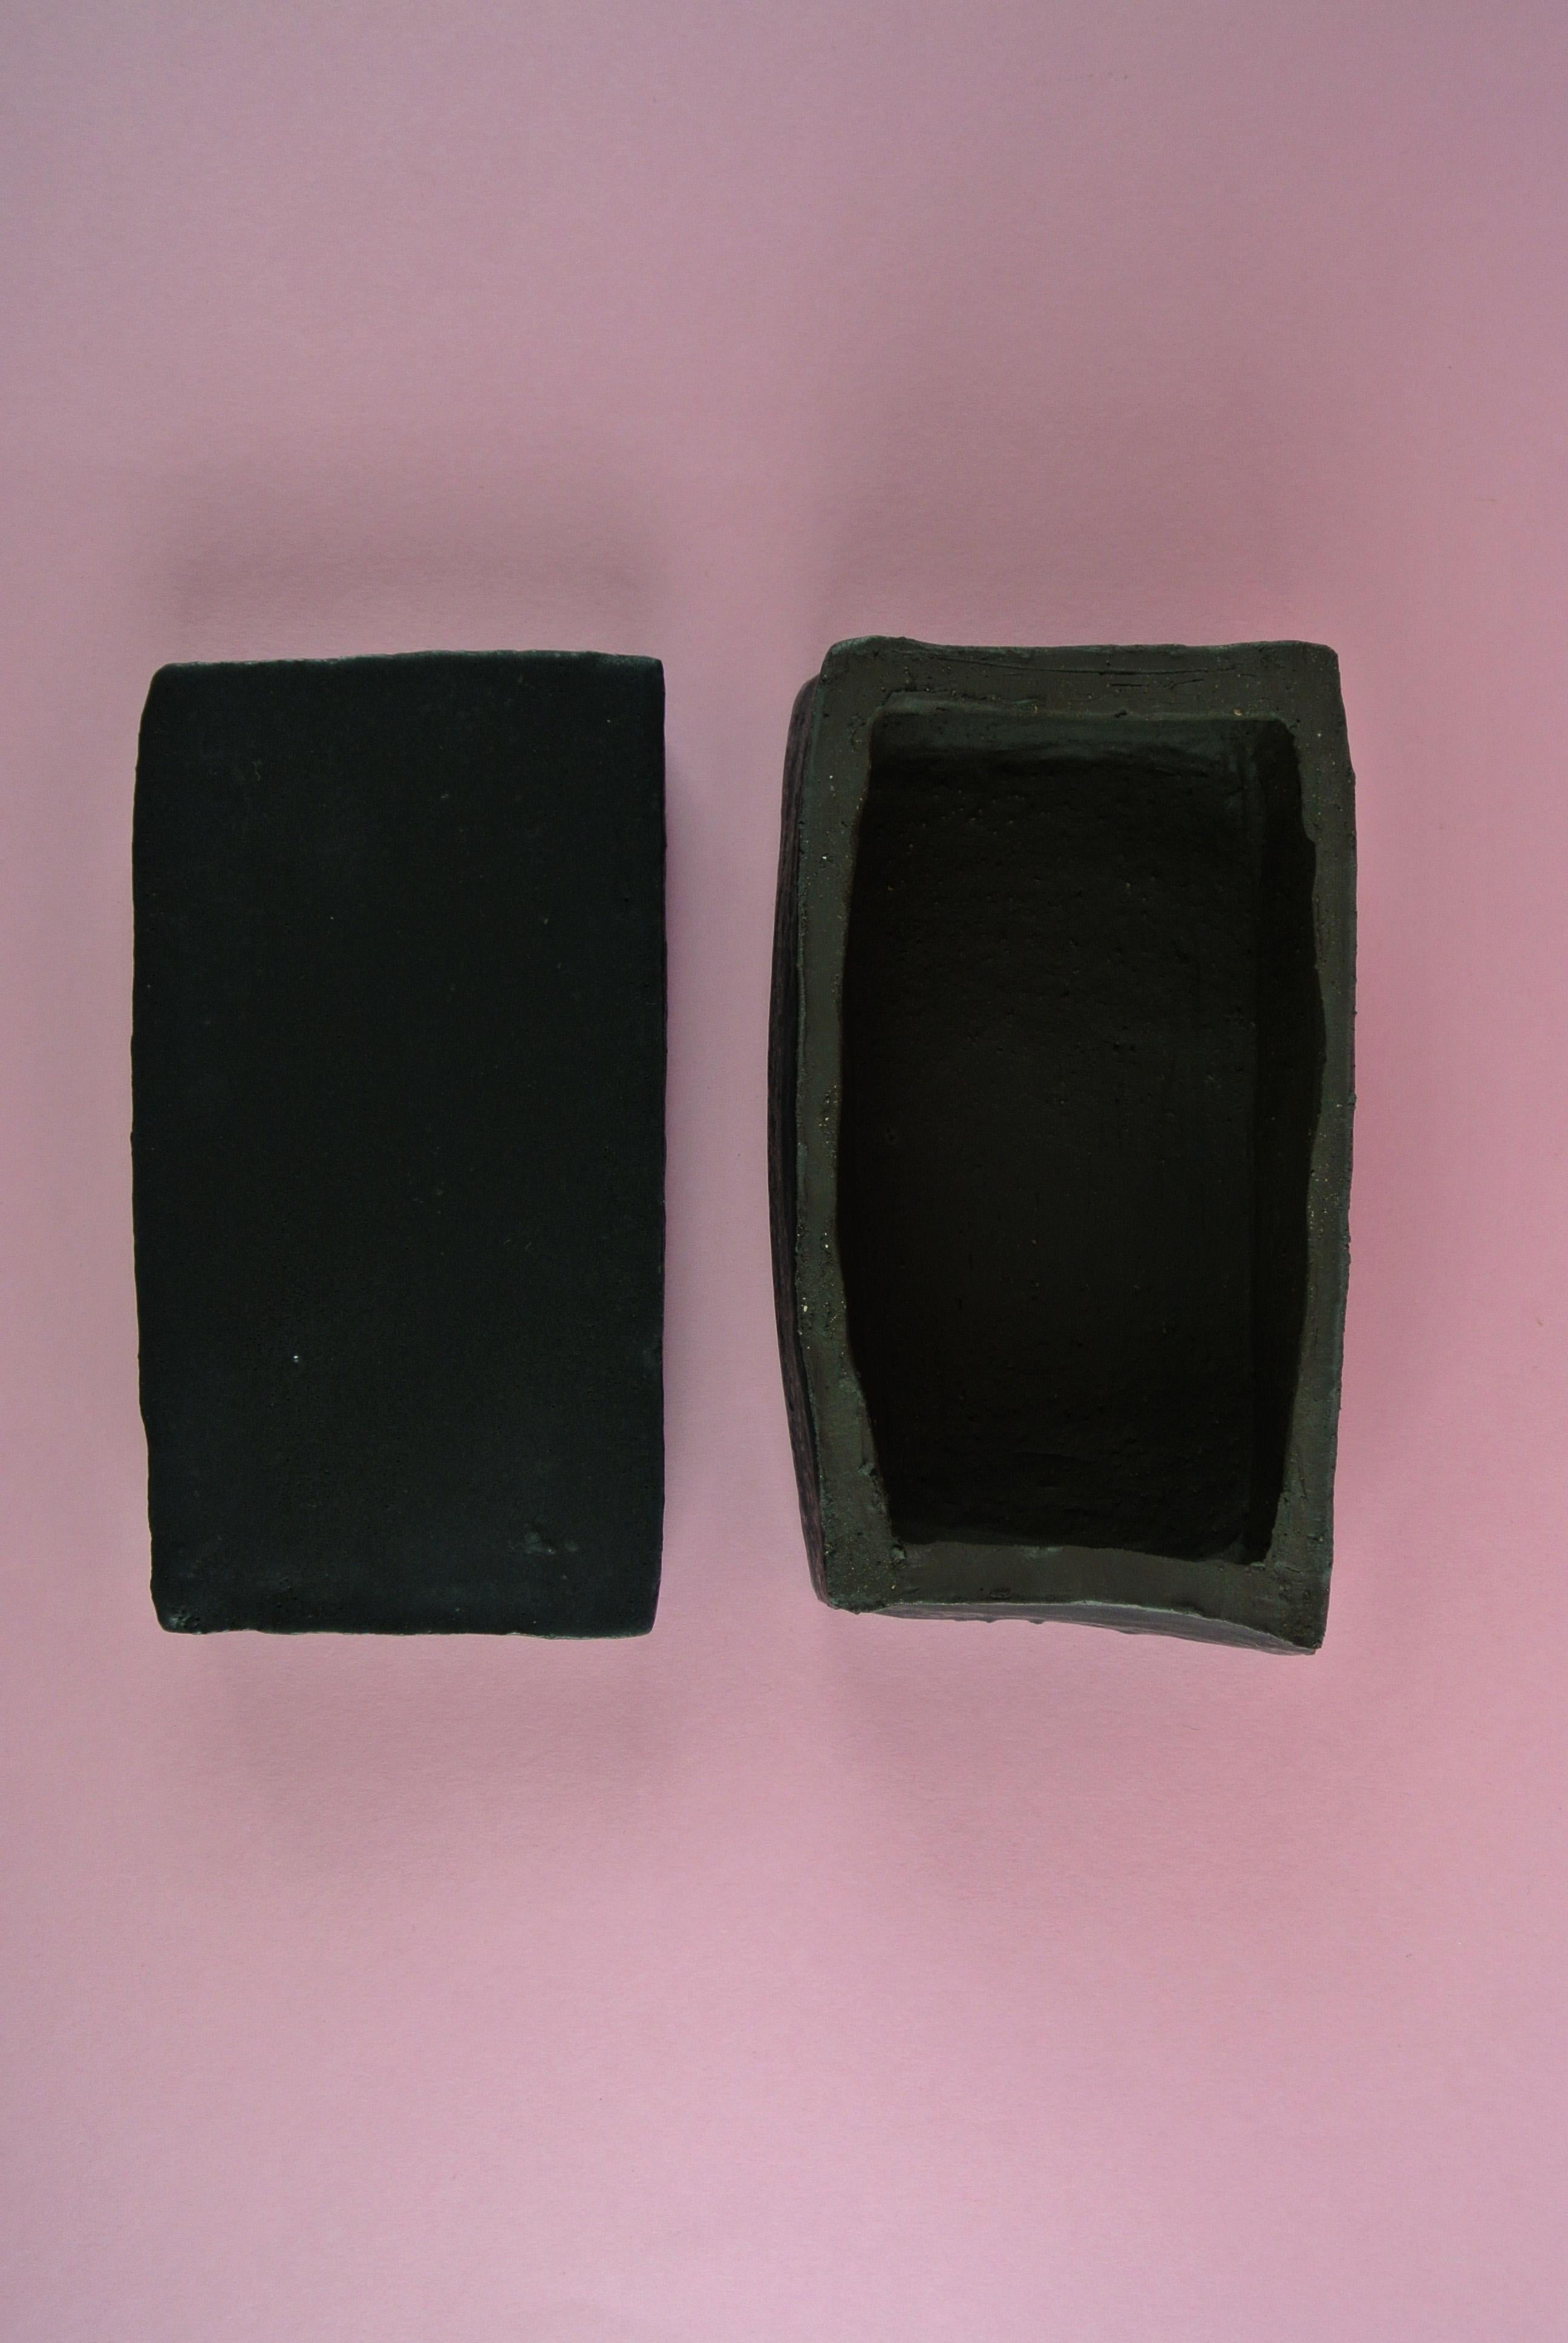 Asymmetric black stoneware box with lid and black matte glaze. Smooth texture with sporadic traces of fire sand visible on the surface and through the glaze. The box is only glazed on the outside. 
Please inquire for more information about other